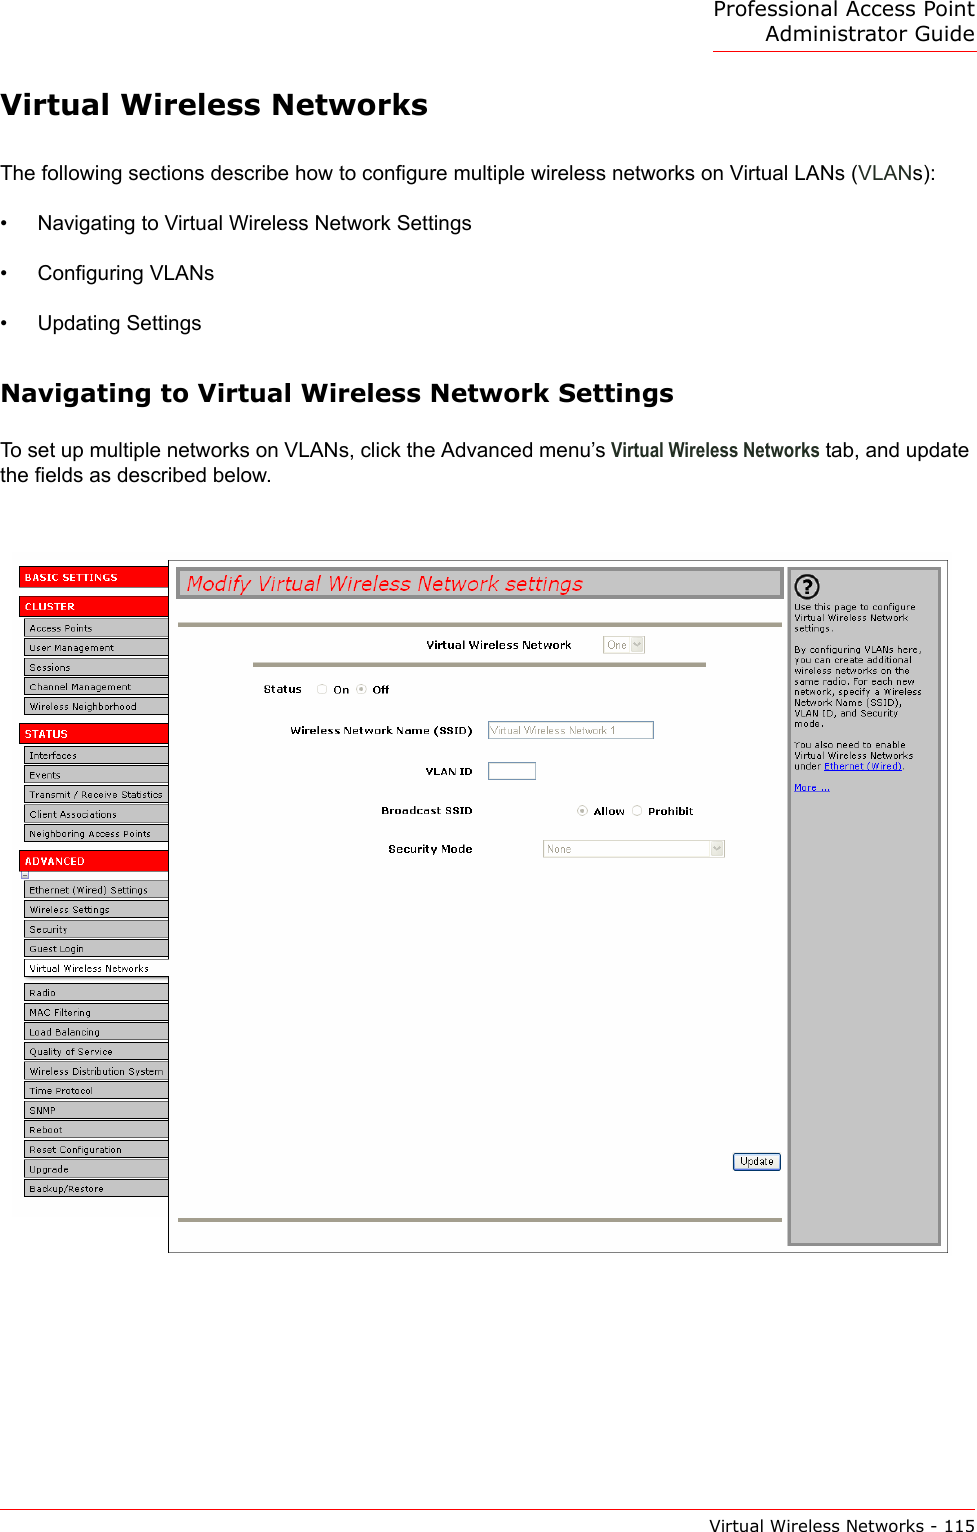 Professional Access Point Administrator GuideVirtual Wireless Networks - 115Virtual Wireless NetworksThe following sections describe how to configure multiple wireless networks on Virtual LANs (VLANs):•Navigating to Virtual Wireless Network Settings•Configuring VLANs•Updating SettingsNavigating to Virtual Wireless Network SettingsTo set up multiple networks on VLANs, click the Advanced menu’s Virtual Wireless Networks tab, and update the fields as described below.